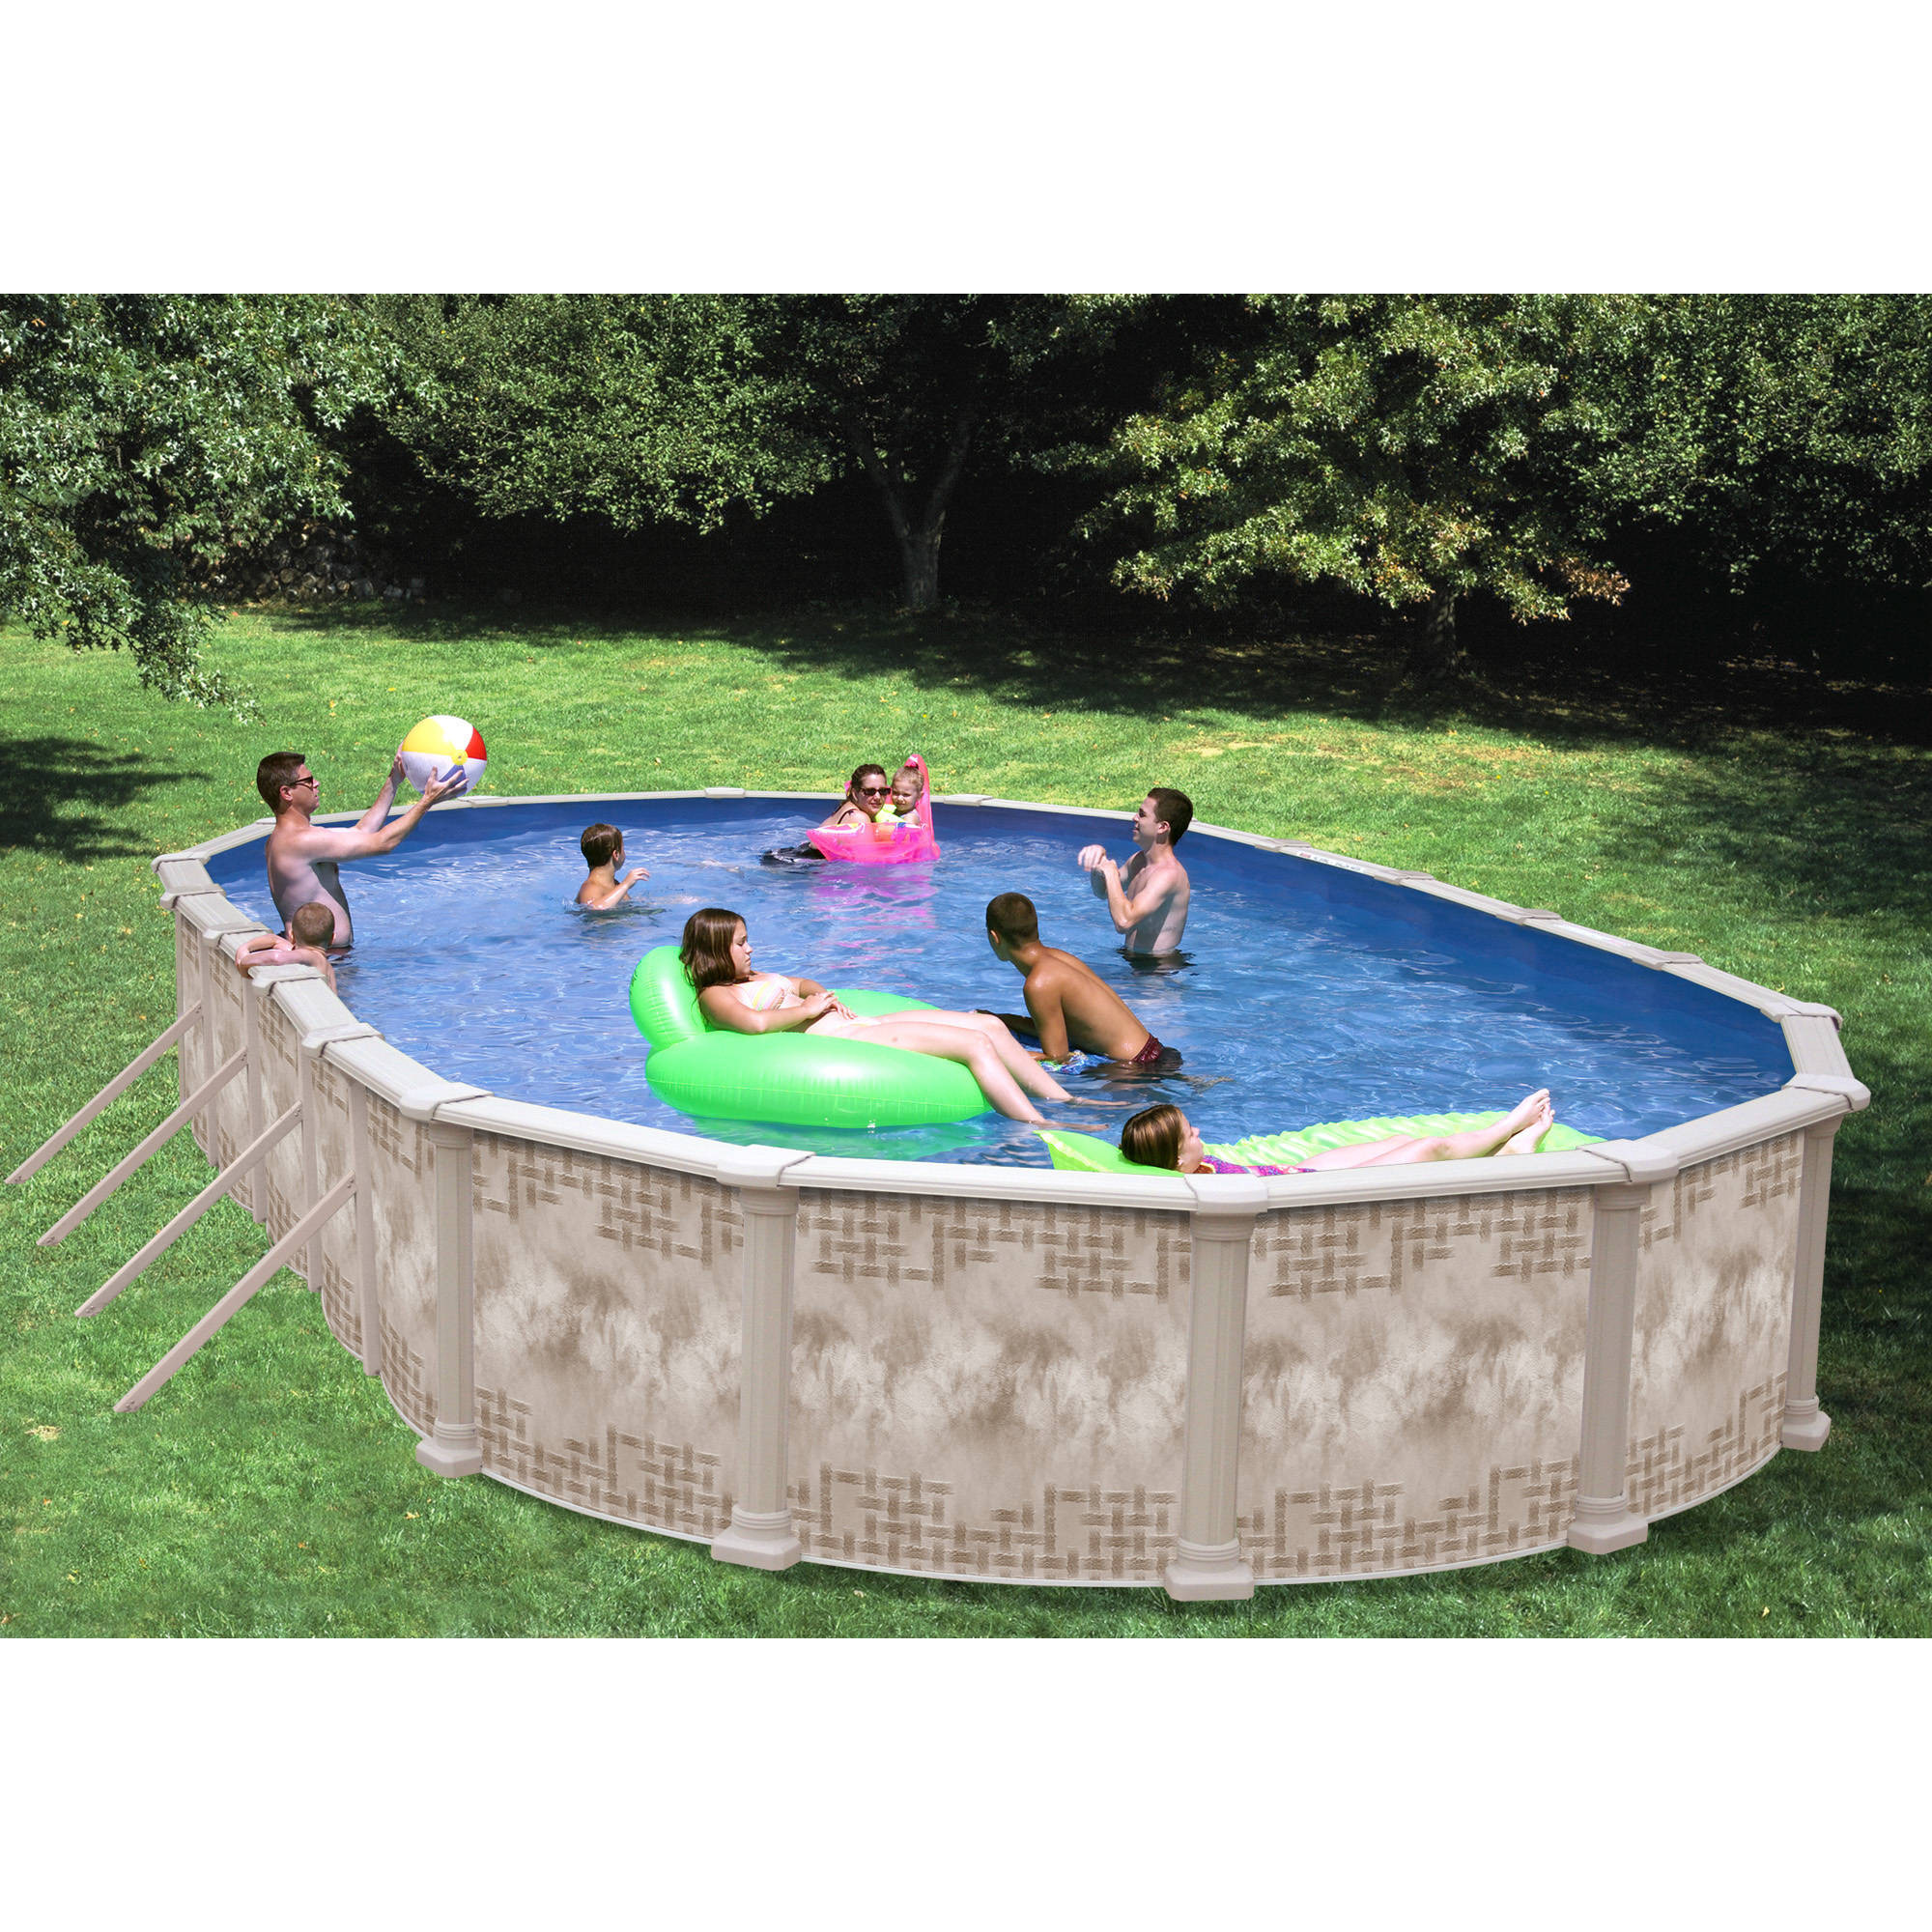 15 Above Ground Pool
 Heritage Oval 30 x 15 x 52 Ground Swimming Pool